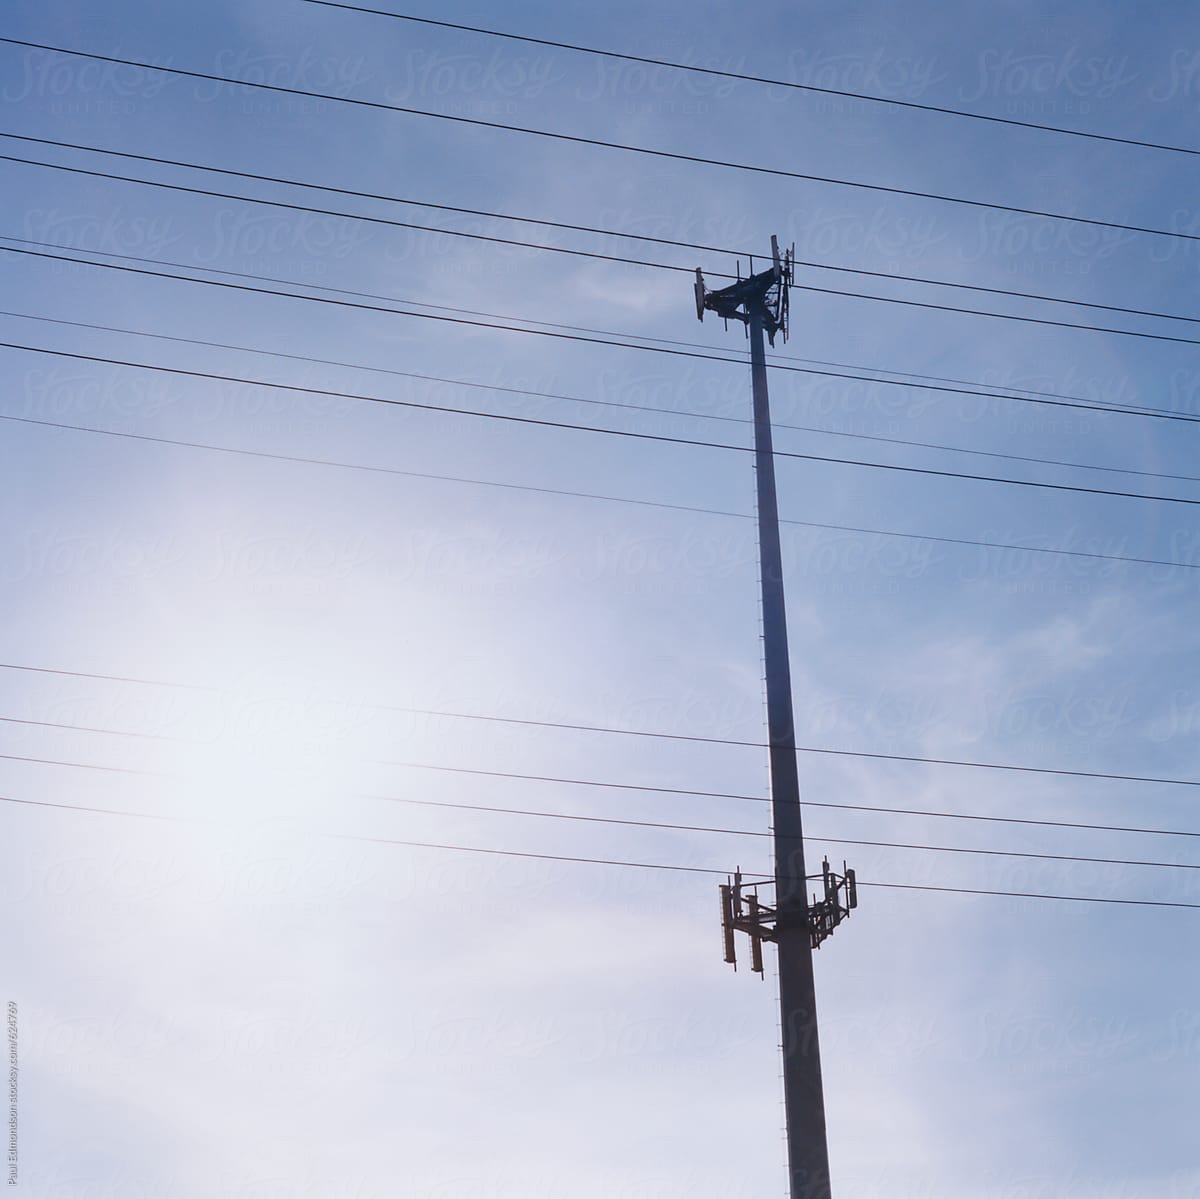 Cellular phone tower and utility wires across sky, bright sun in distance